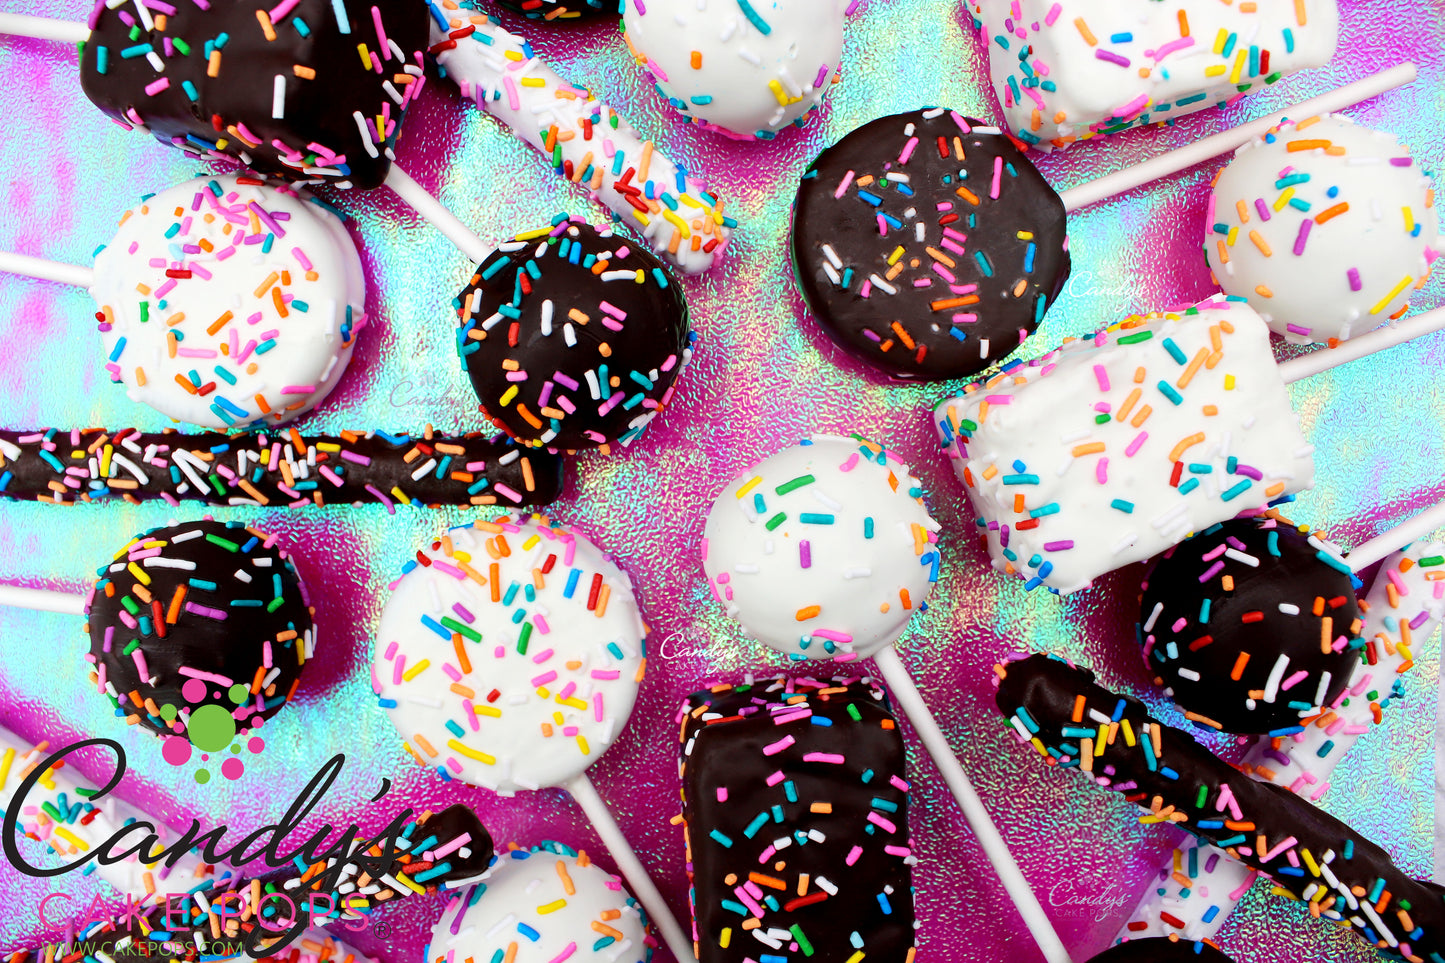 Festive Celebration Confetti Sprinkle Party Variety Package. Chocolate Dipped Cake Pops, Oreos, Rice Krispies, & Pretzel Rods! - Candy's Cake Pops